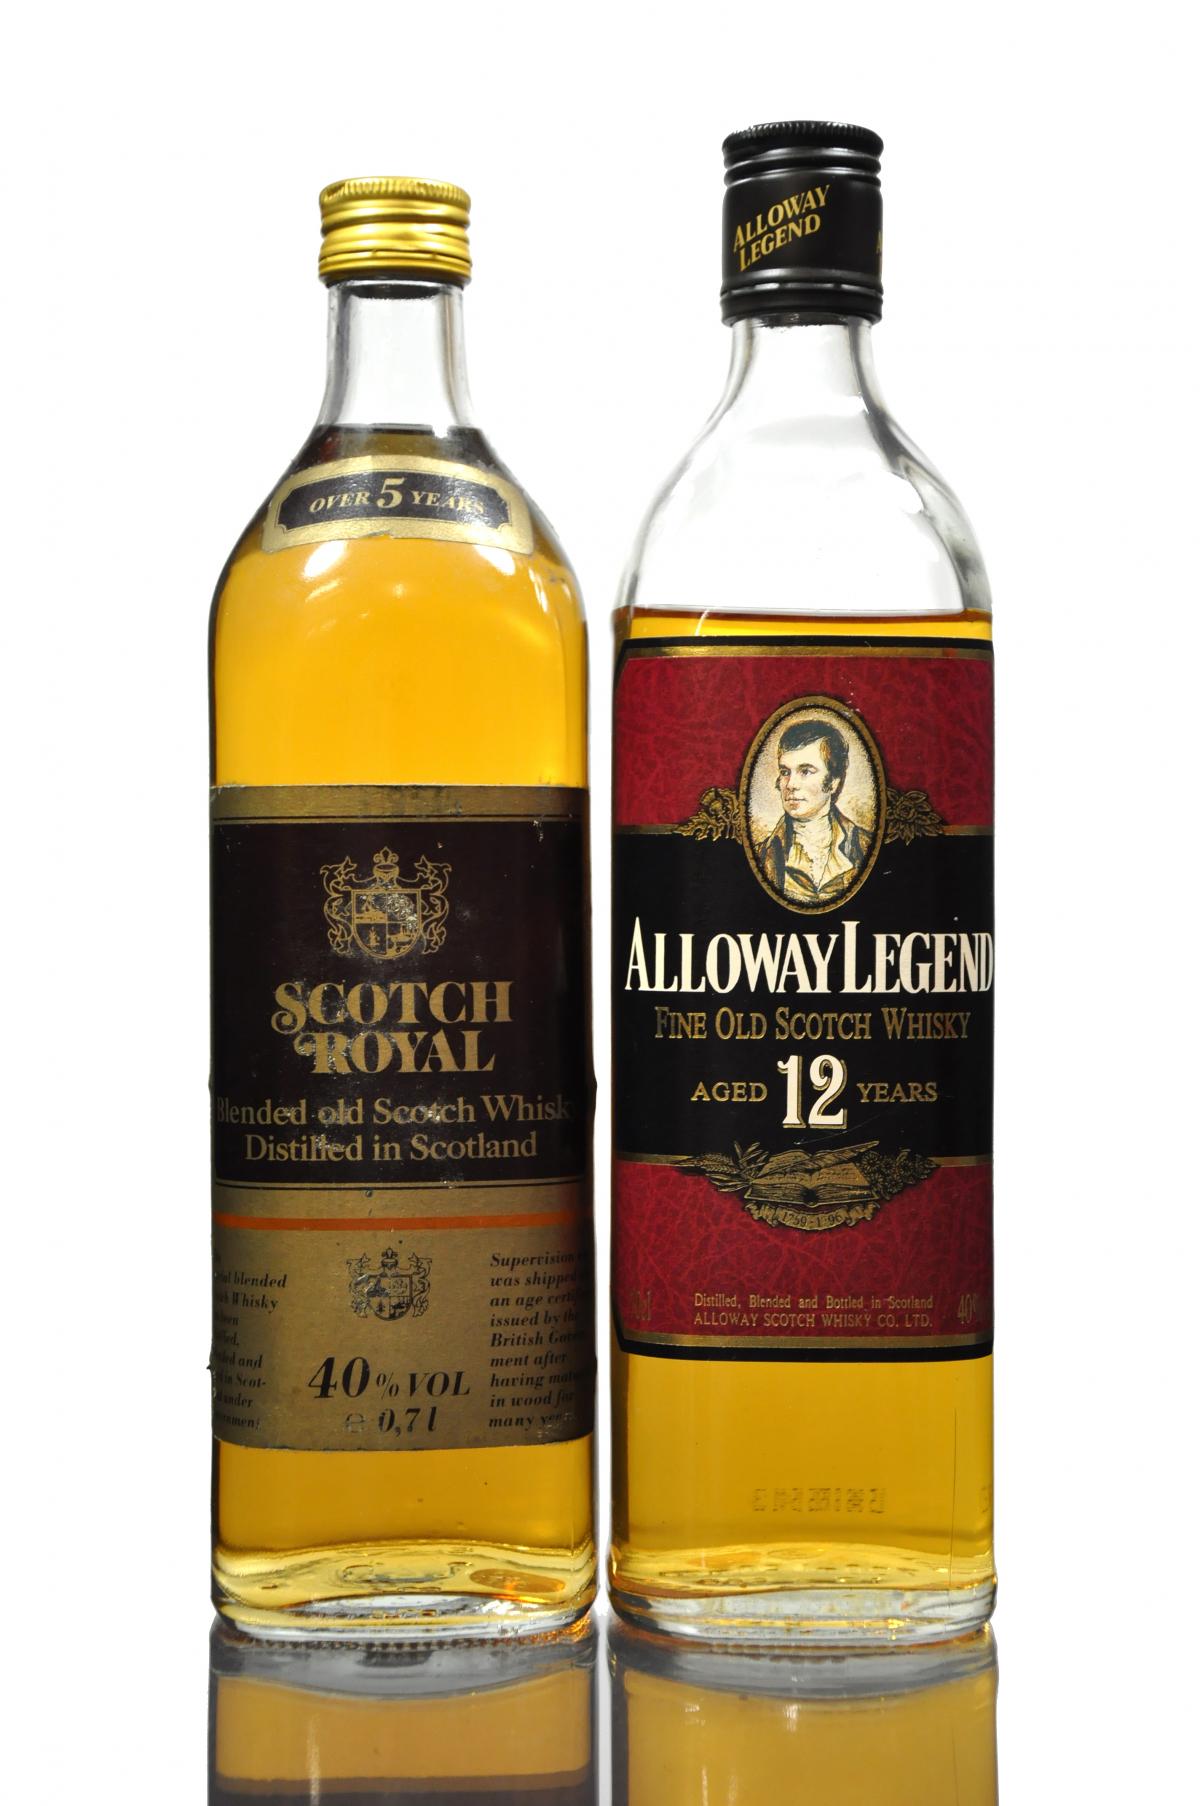 Alloway Legend 12 Year Old - Scotch Royal 5 Year Old